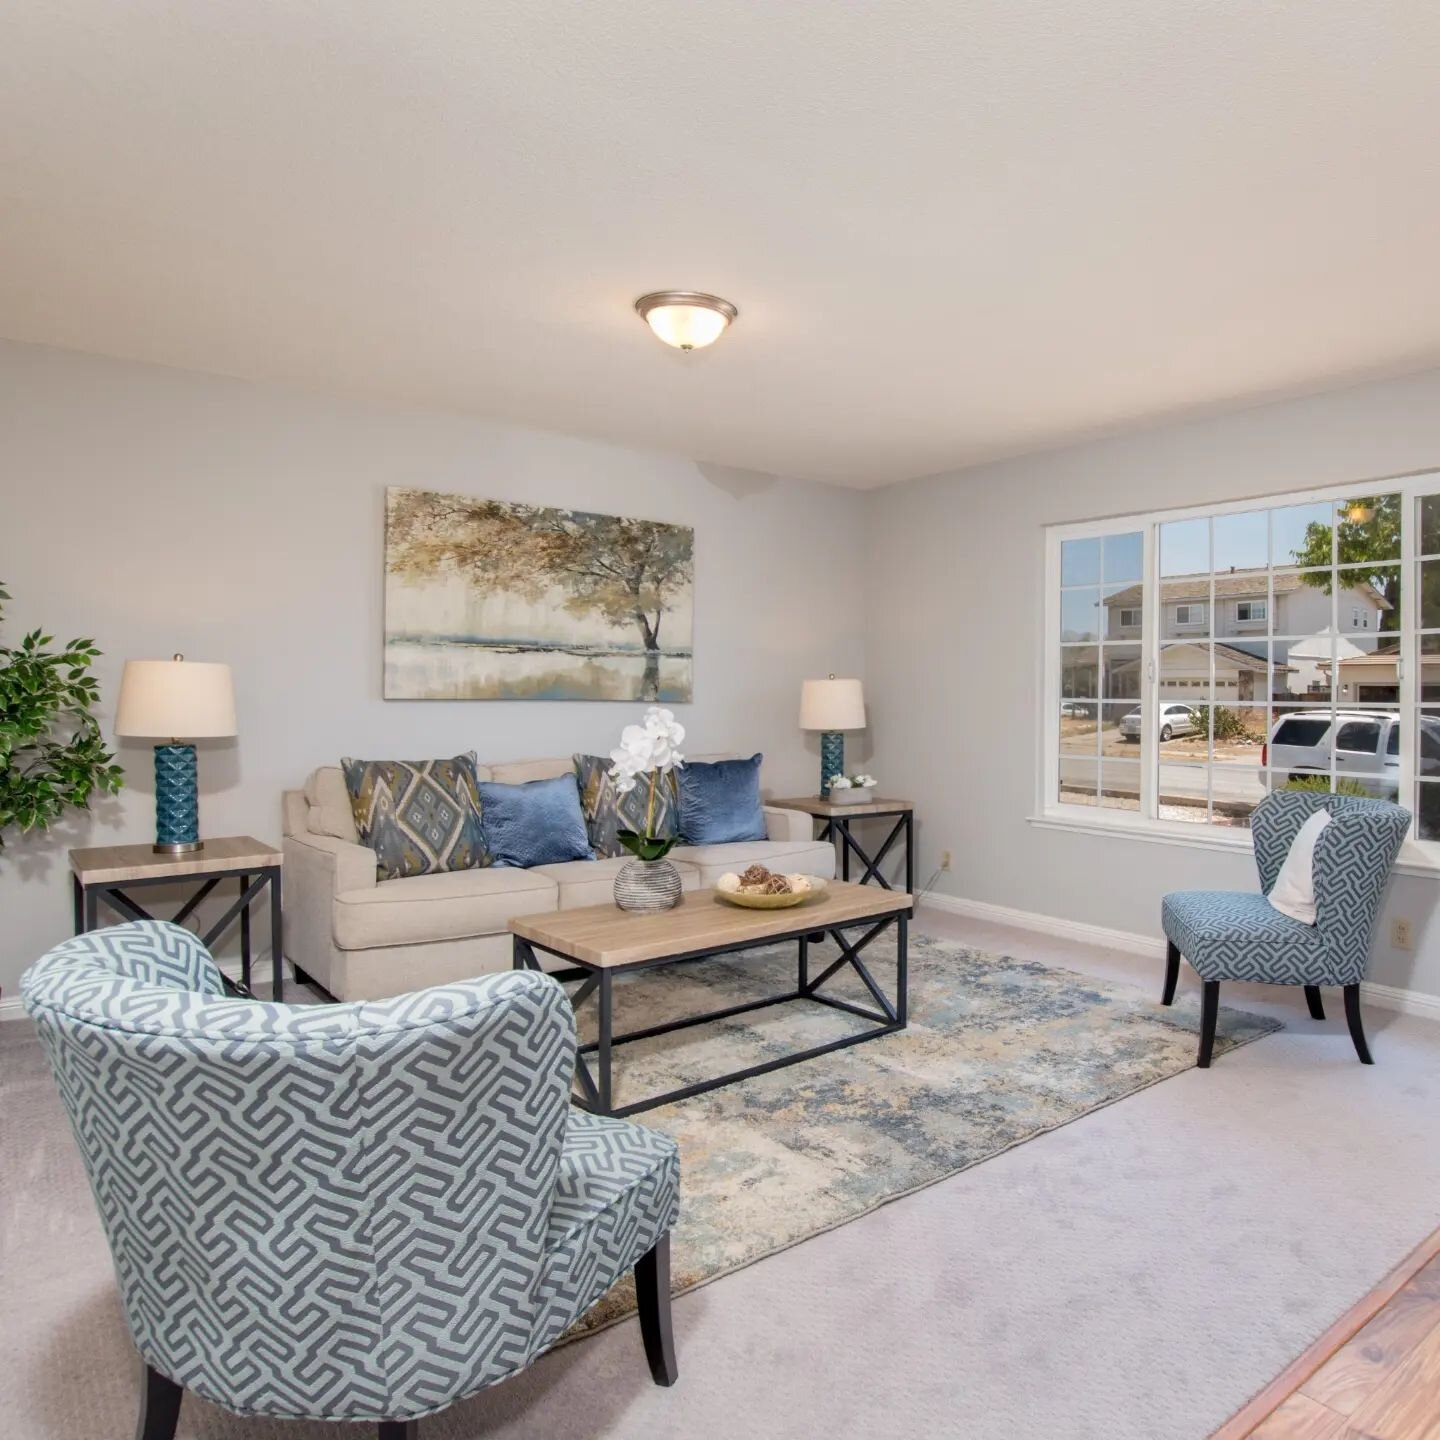 Available now-2661 Baton Rouge Dr. San Jose 95133!

Offered by Margarita Bergman,  Compass.

#staging #stager #realestate #realtor #realestateagent #realestatestaging #realestatestager #interiordecorating #interiordesign #interiordecorator #interiord